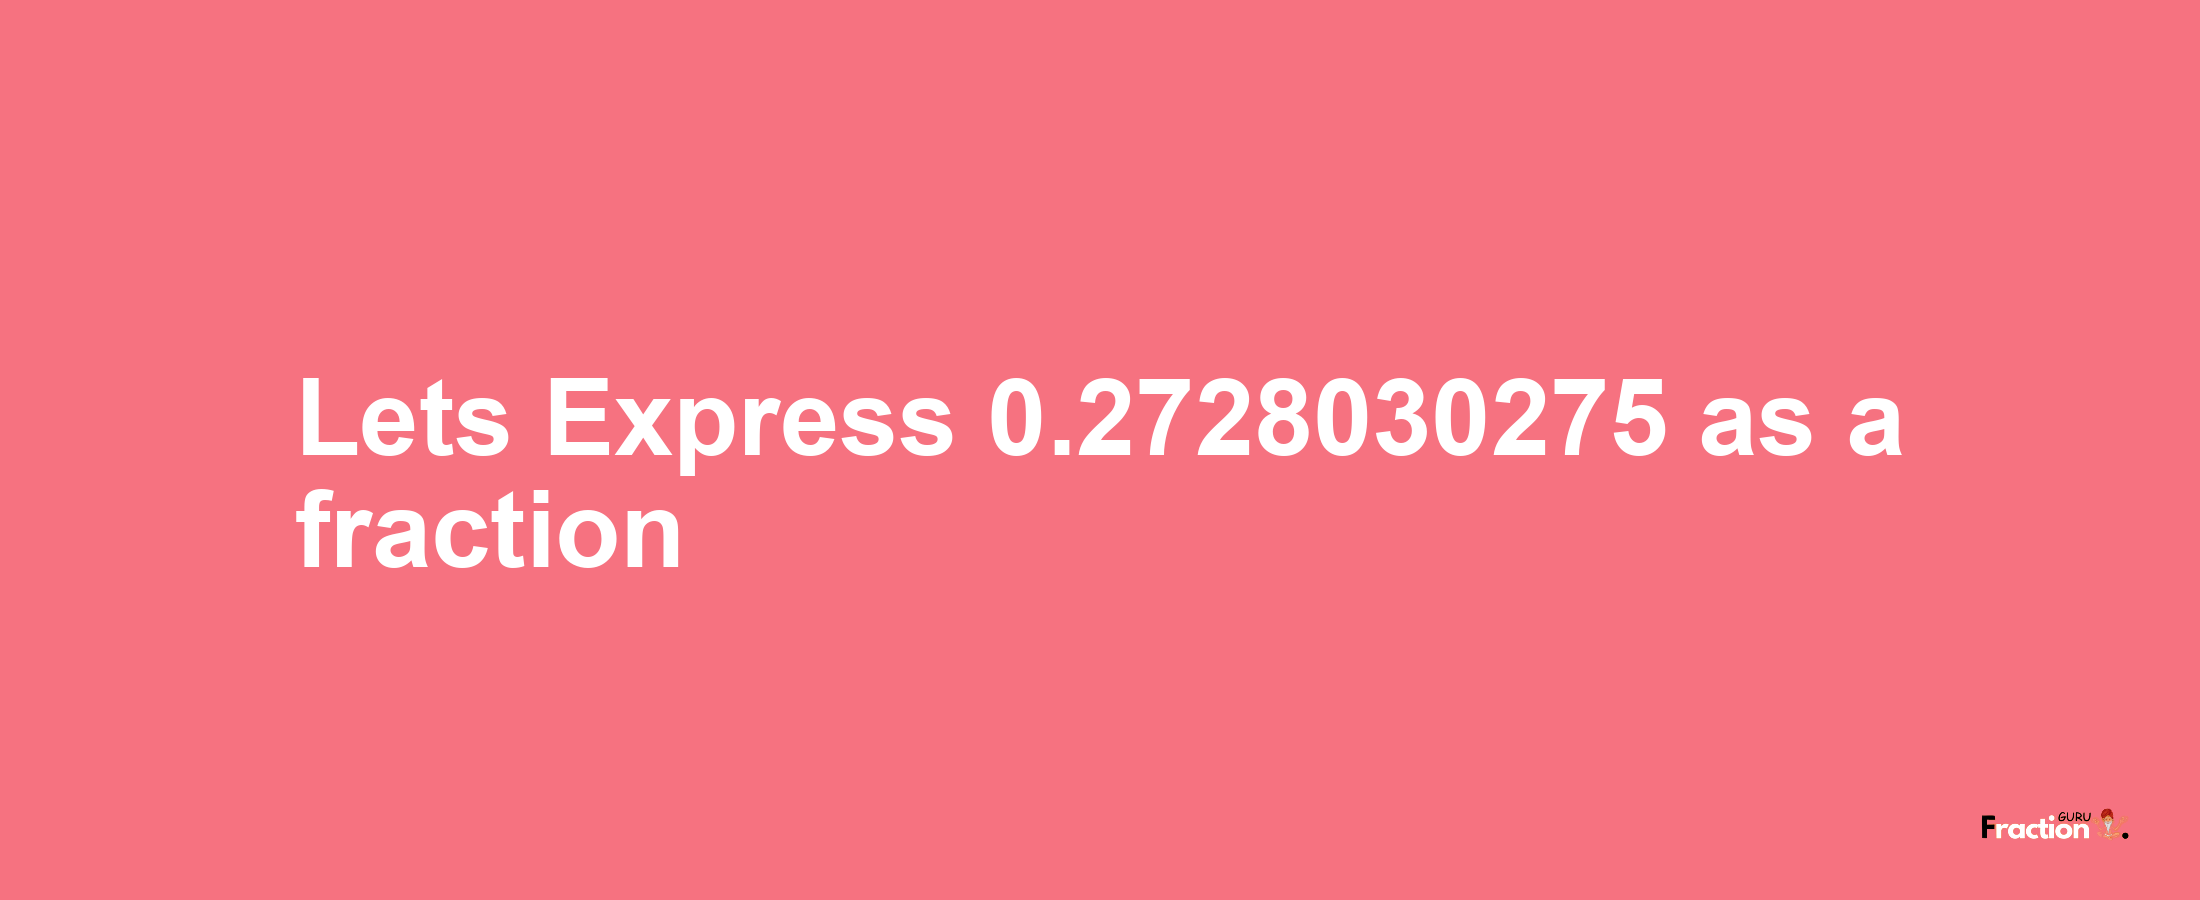 Lets Express 0.2728030275 as afraction